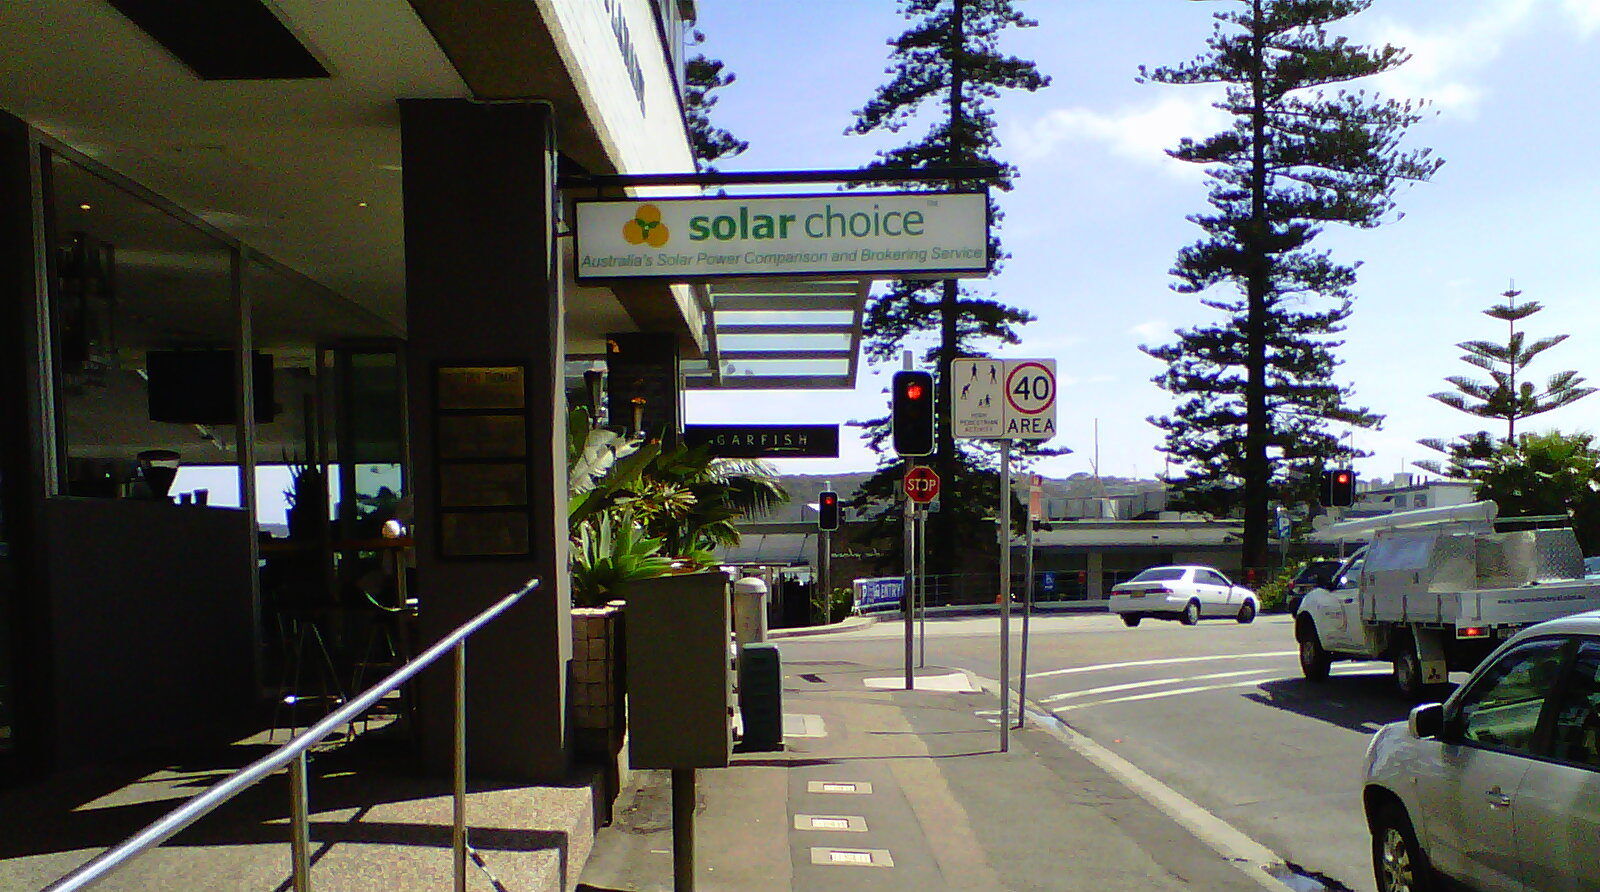 The Solar Choice office, on the corner of Wentworth St and East Esplanade, Manly